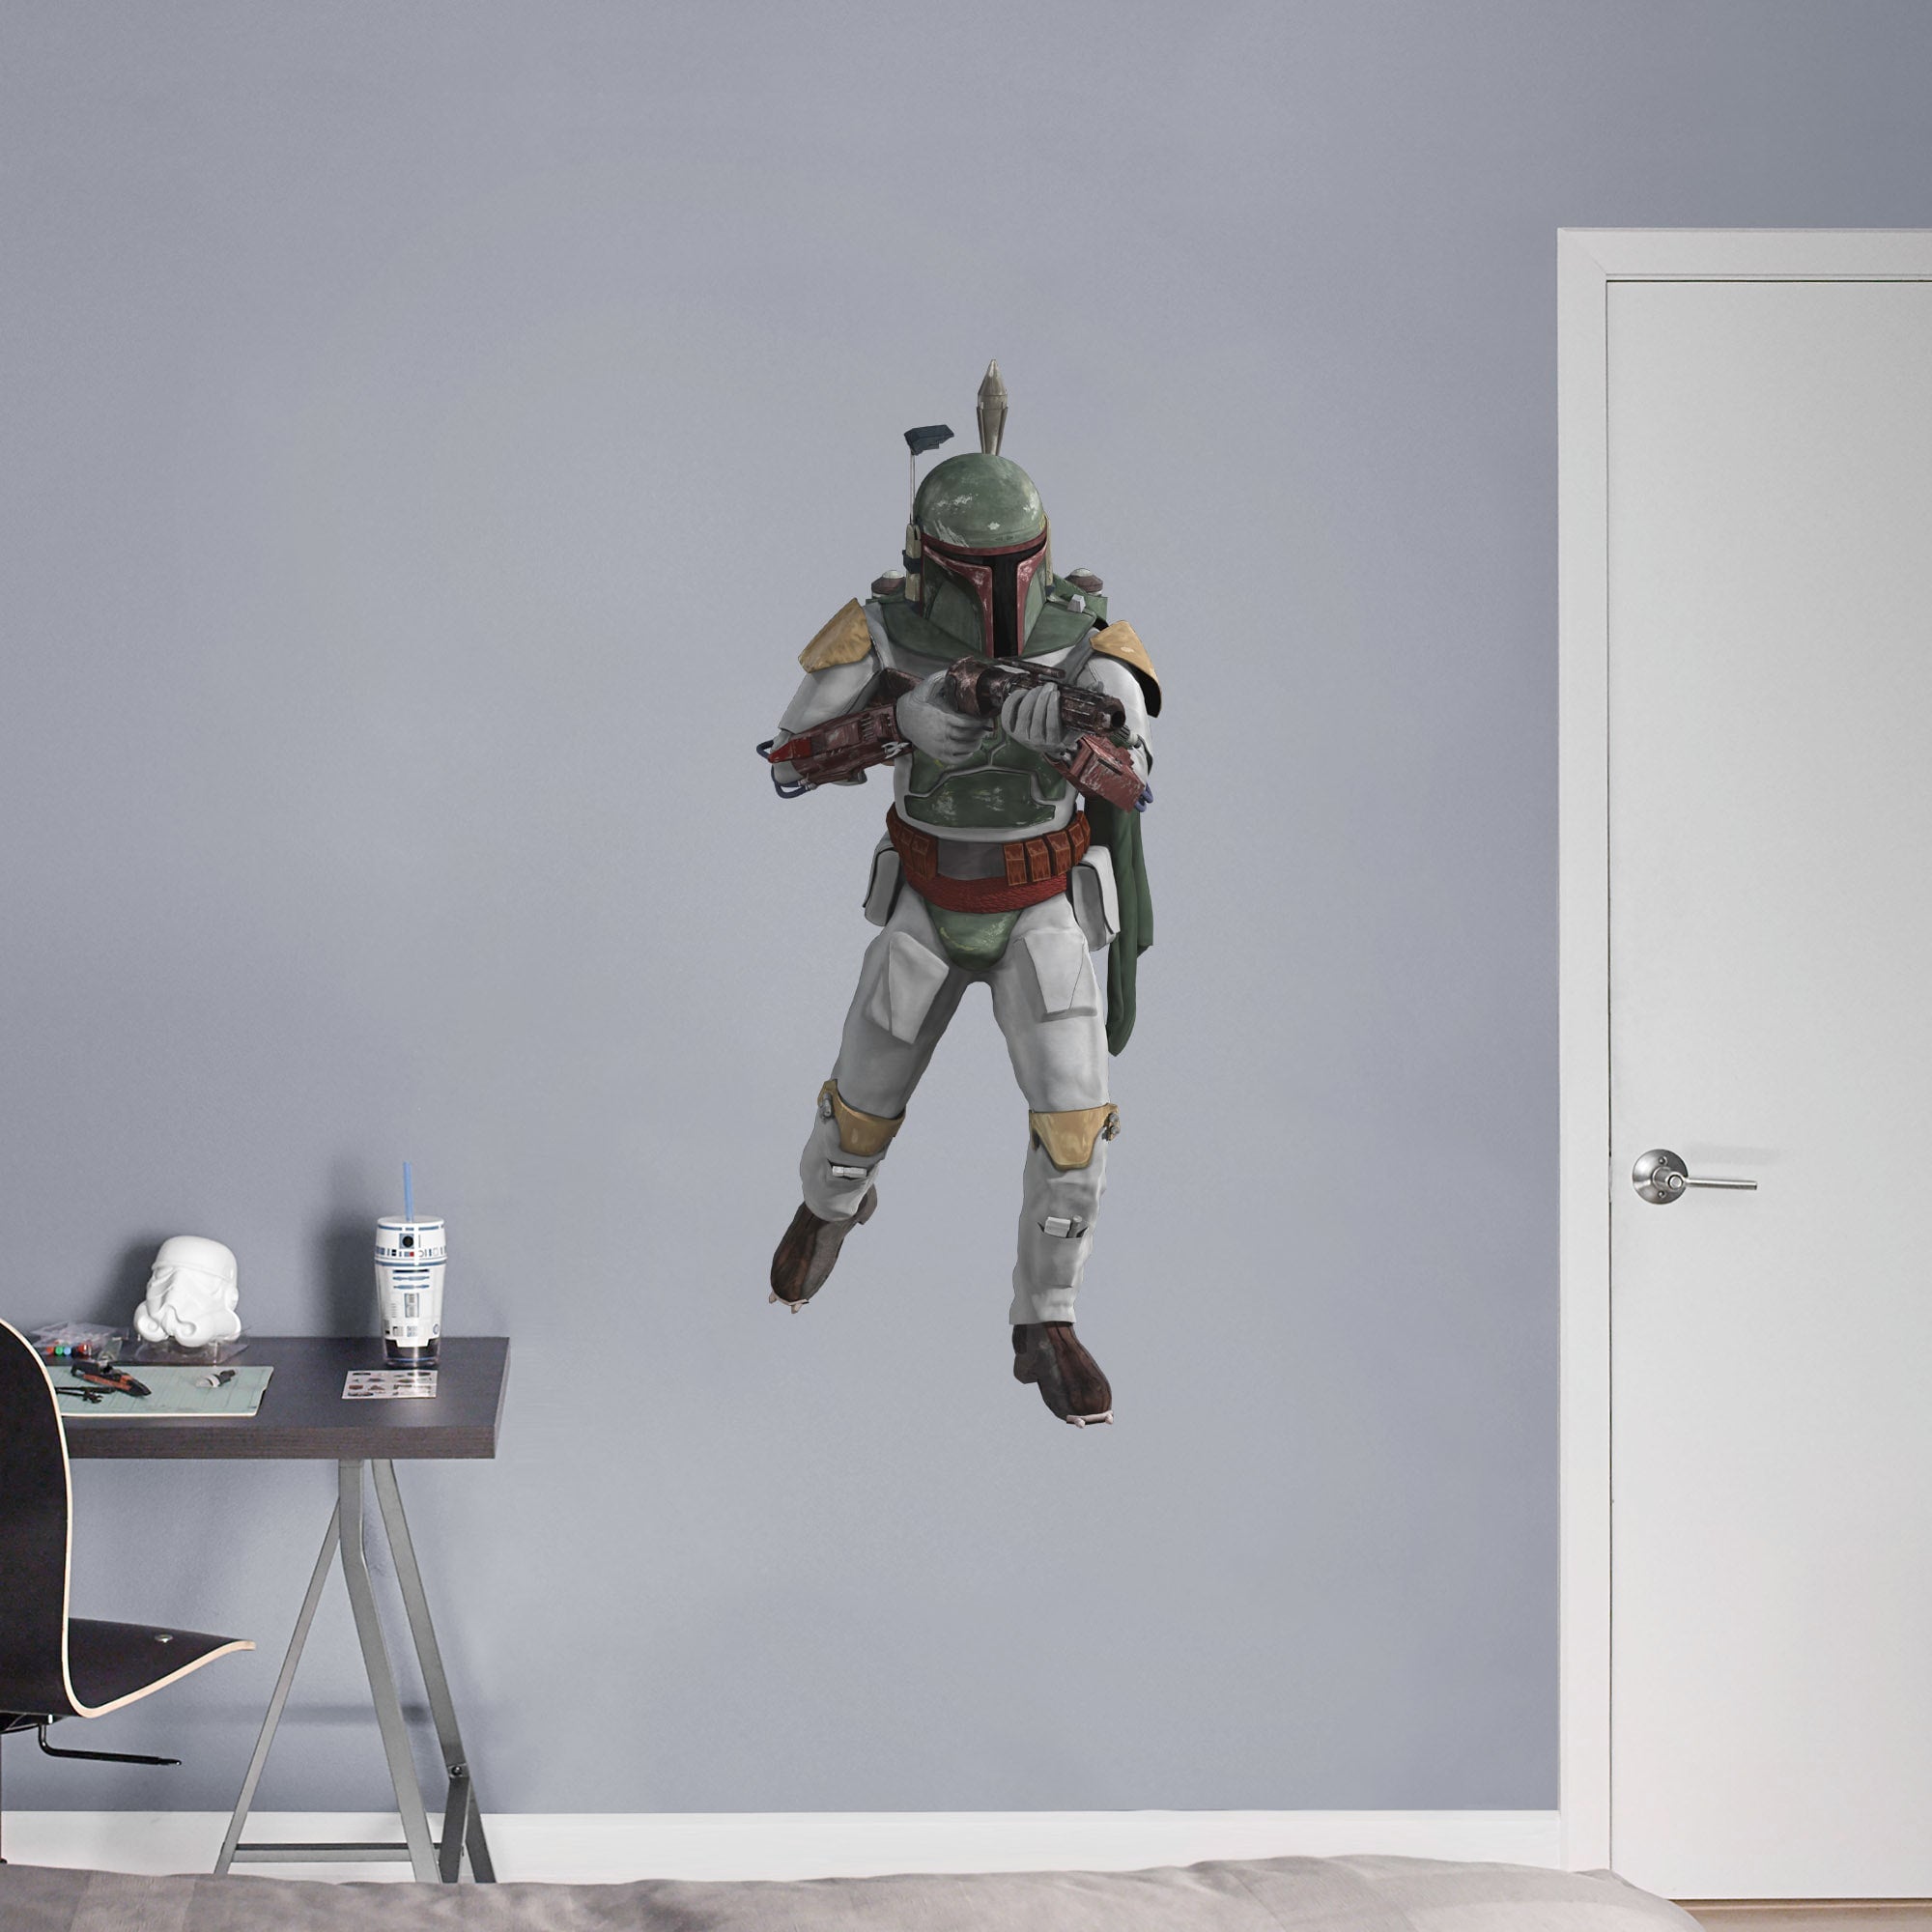 Boba Fett - Officially Licensed Removable Wall Decal Giant Character + 2 Decals (20"W x 51"H) by Fathead | Vinyl